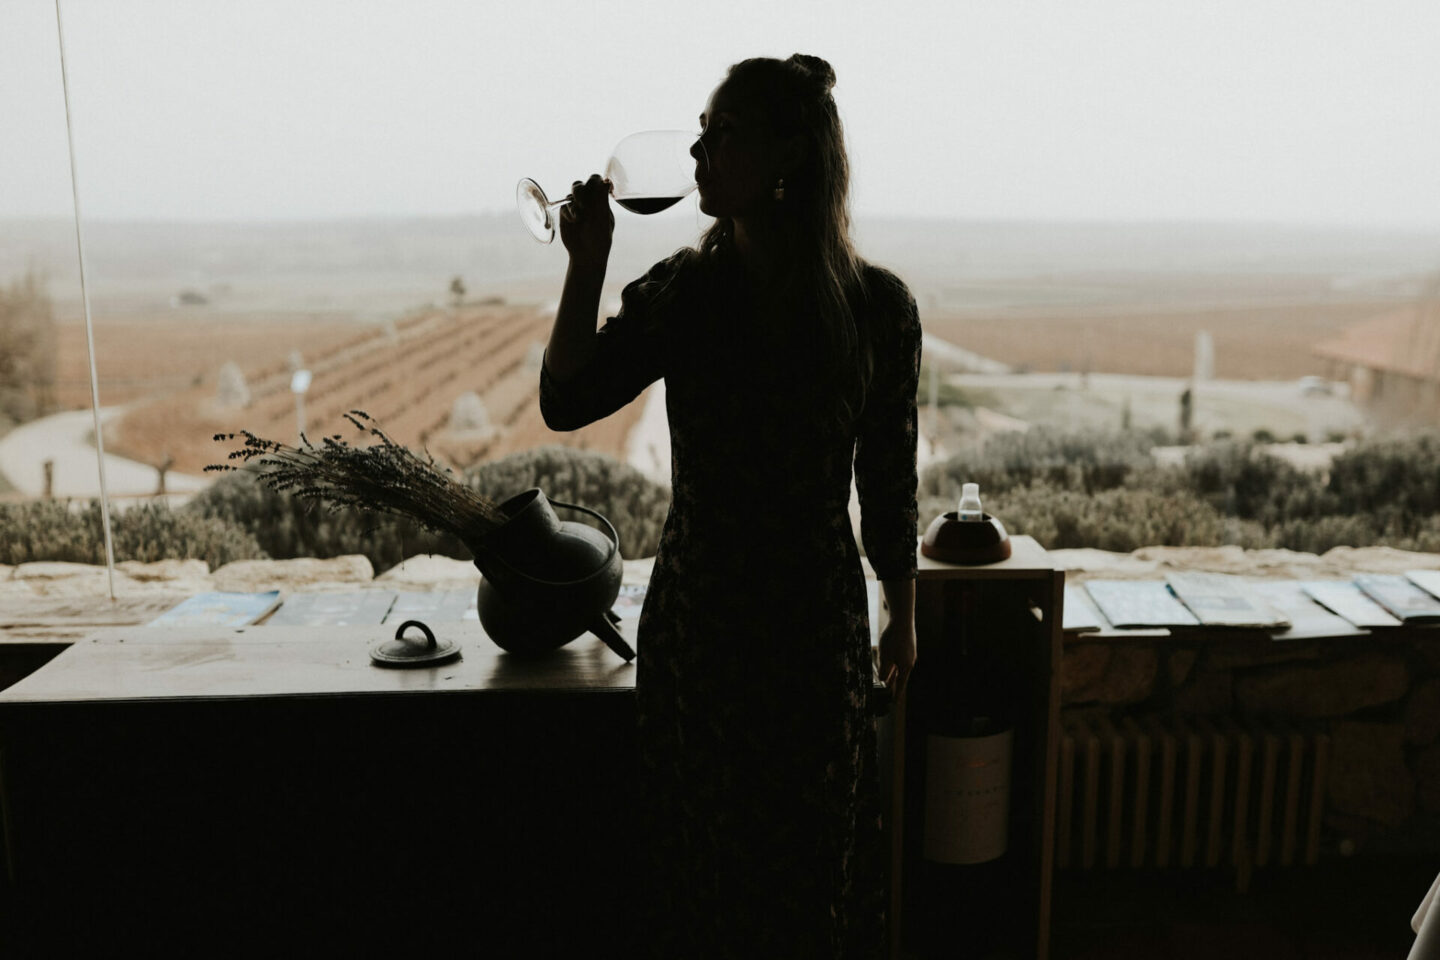 Paige at a winery in Spain drinking Tempranillo